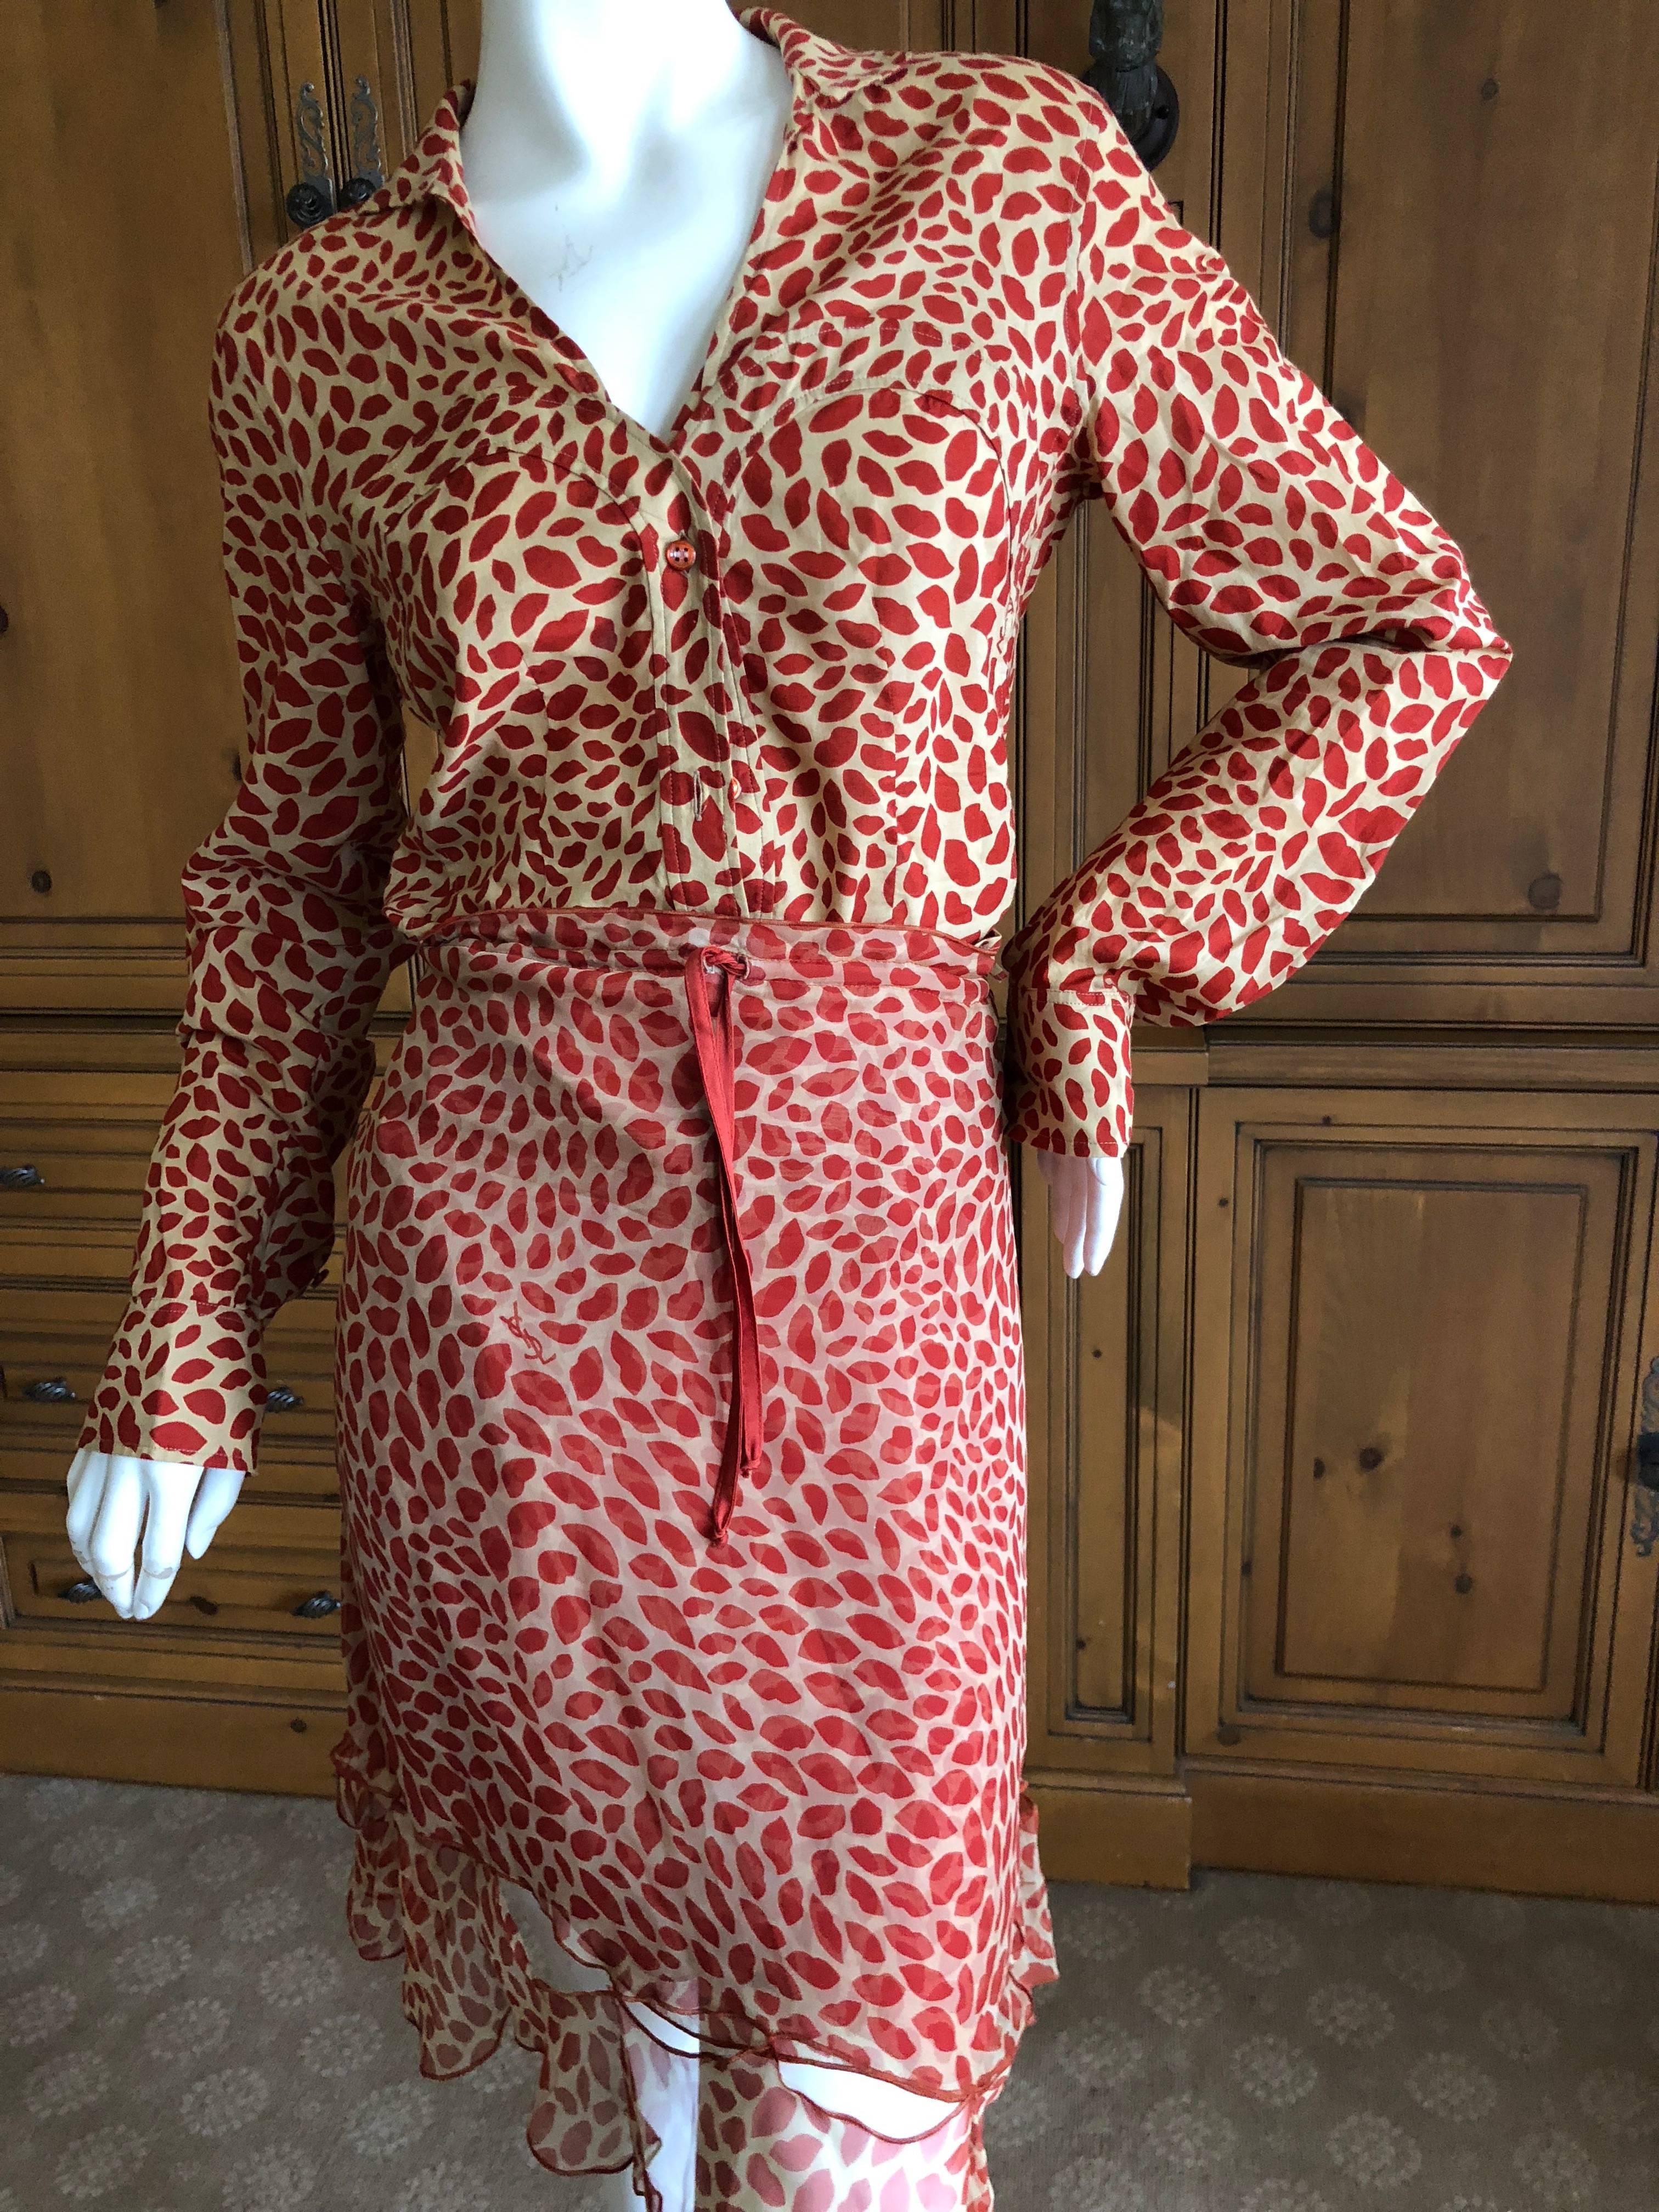 Romantic Yves Saint Laurent Rive Gauche Vintage Lips Print Two Piece Dress.
Flamenco style skirt with ruffles and a button up jacket 
Size 40
Skirt; Waist 26